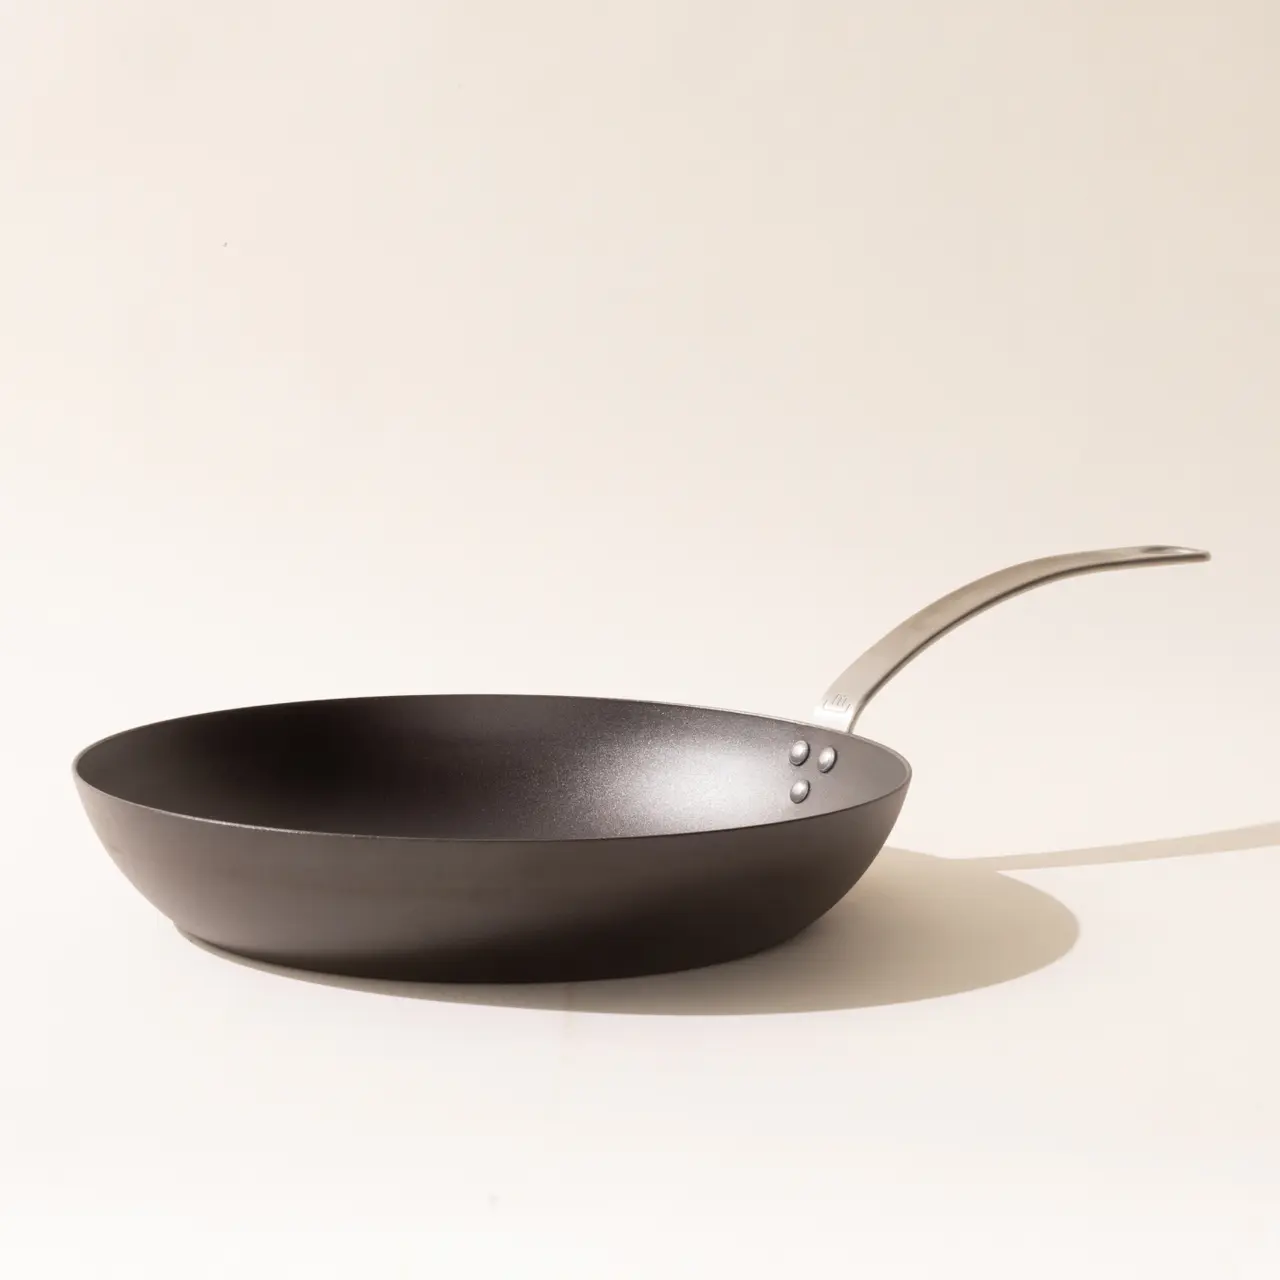 A black non-stick frying pan with a stainless steel handle shown against a light background.